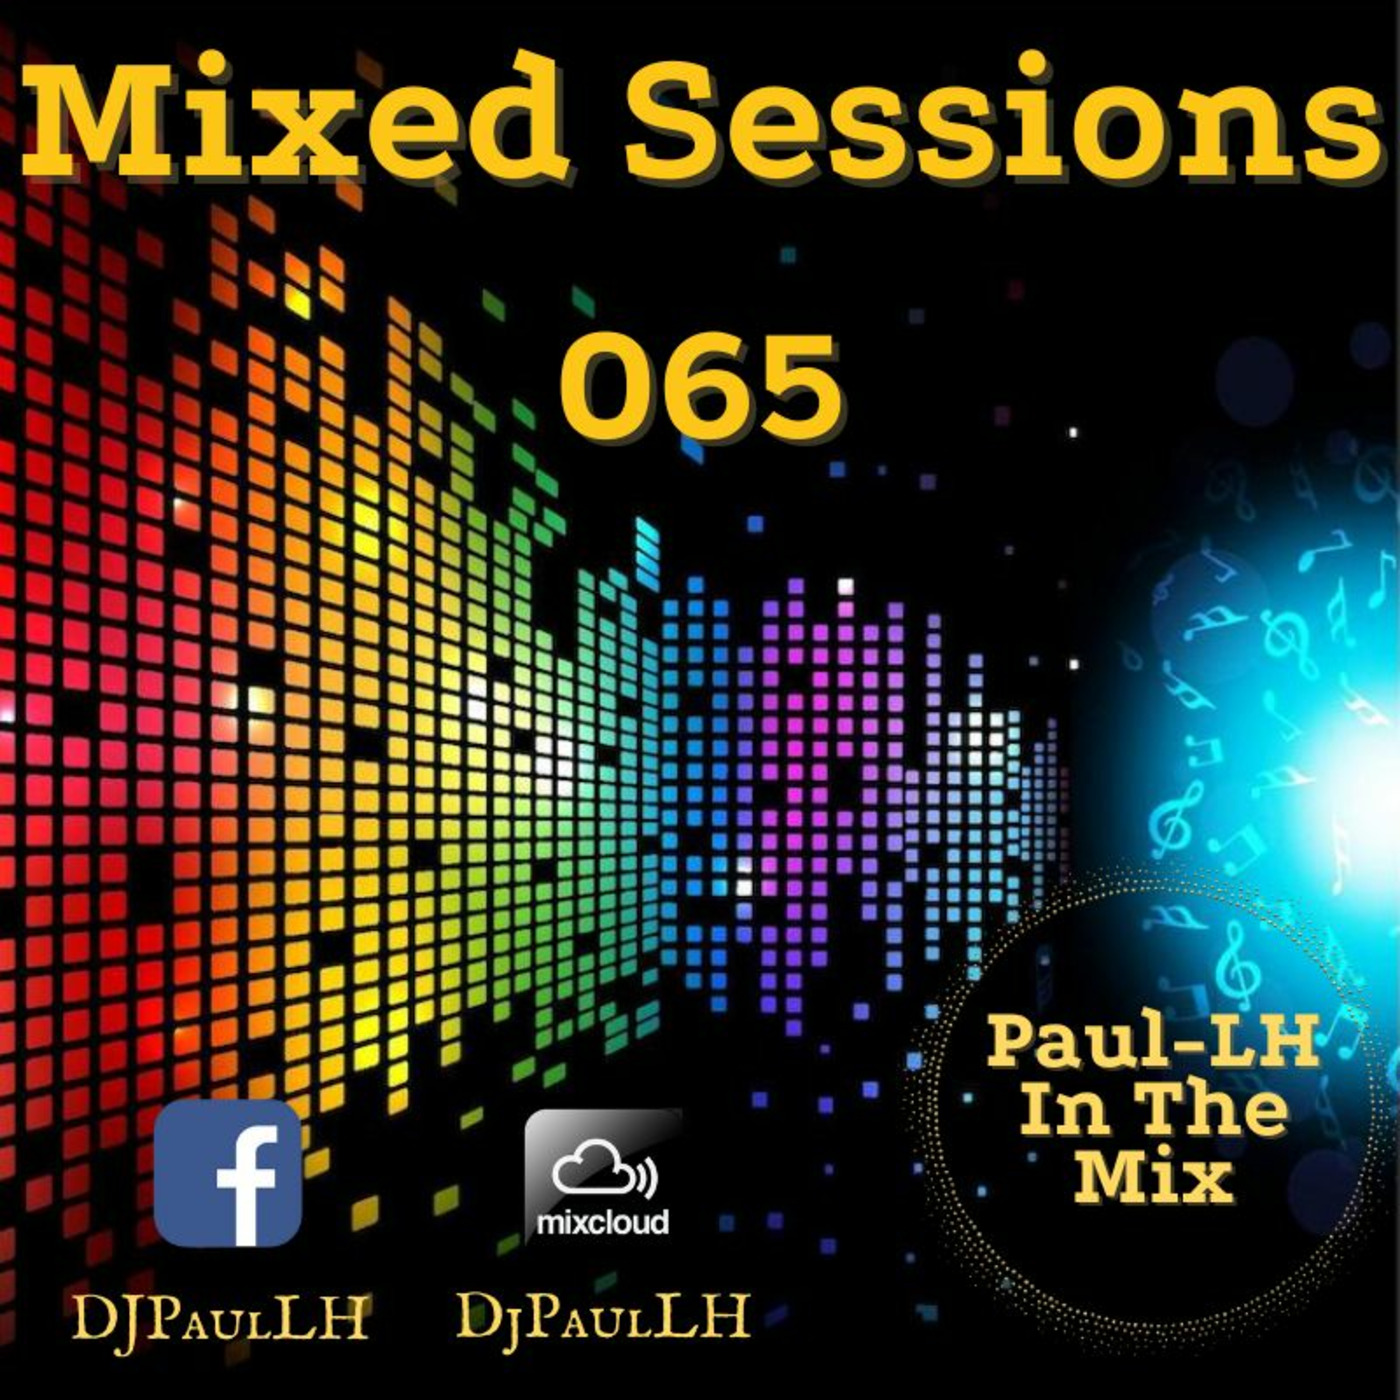 Mixed Sessions 065